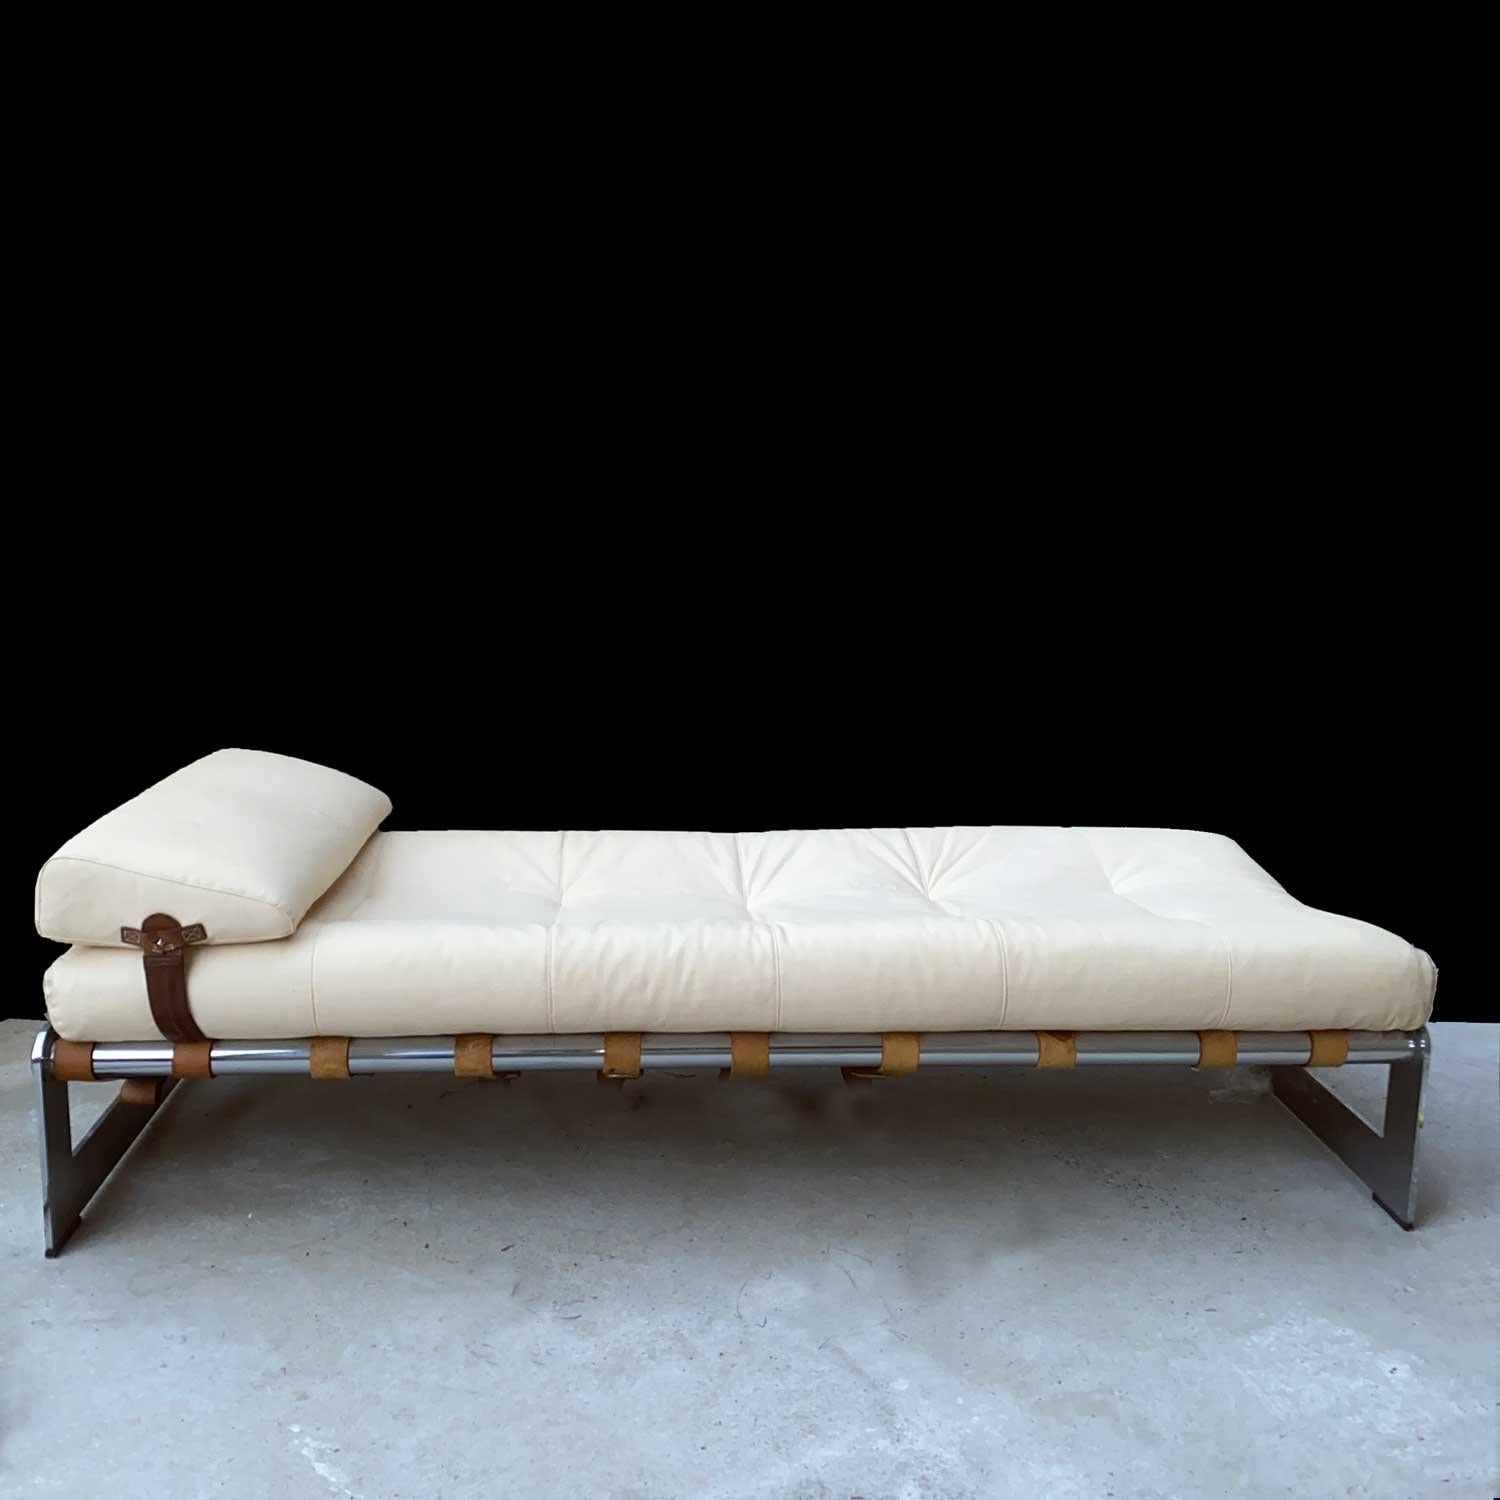 Gilles Bouchez ( 1930)
, famous French architect, has designed a limited series of furniture with a chrome steel structure and leather strap. This is the chaise longue or daybed, the rarest object of this production. Modernity, refinement, and